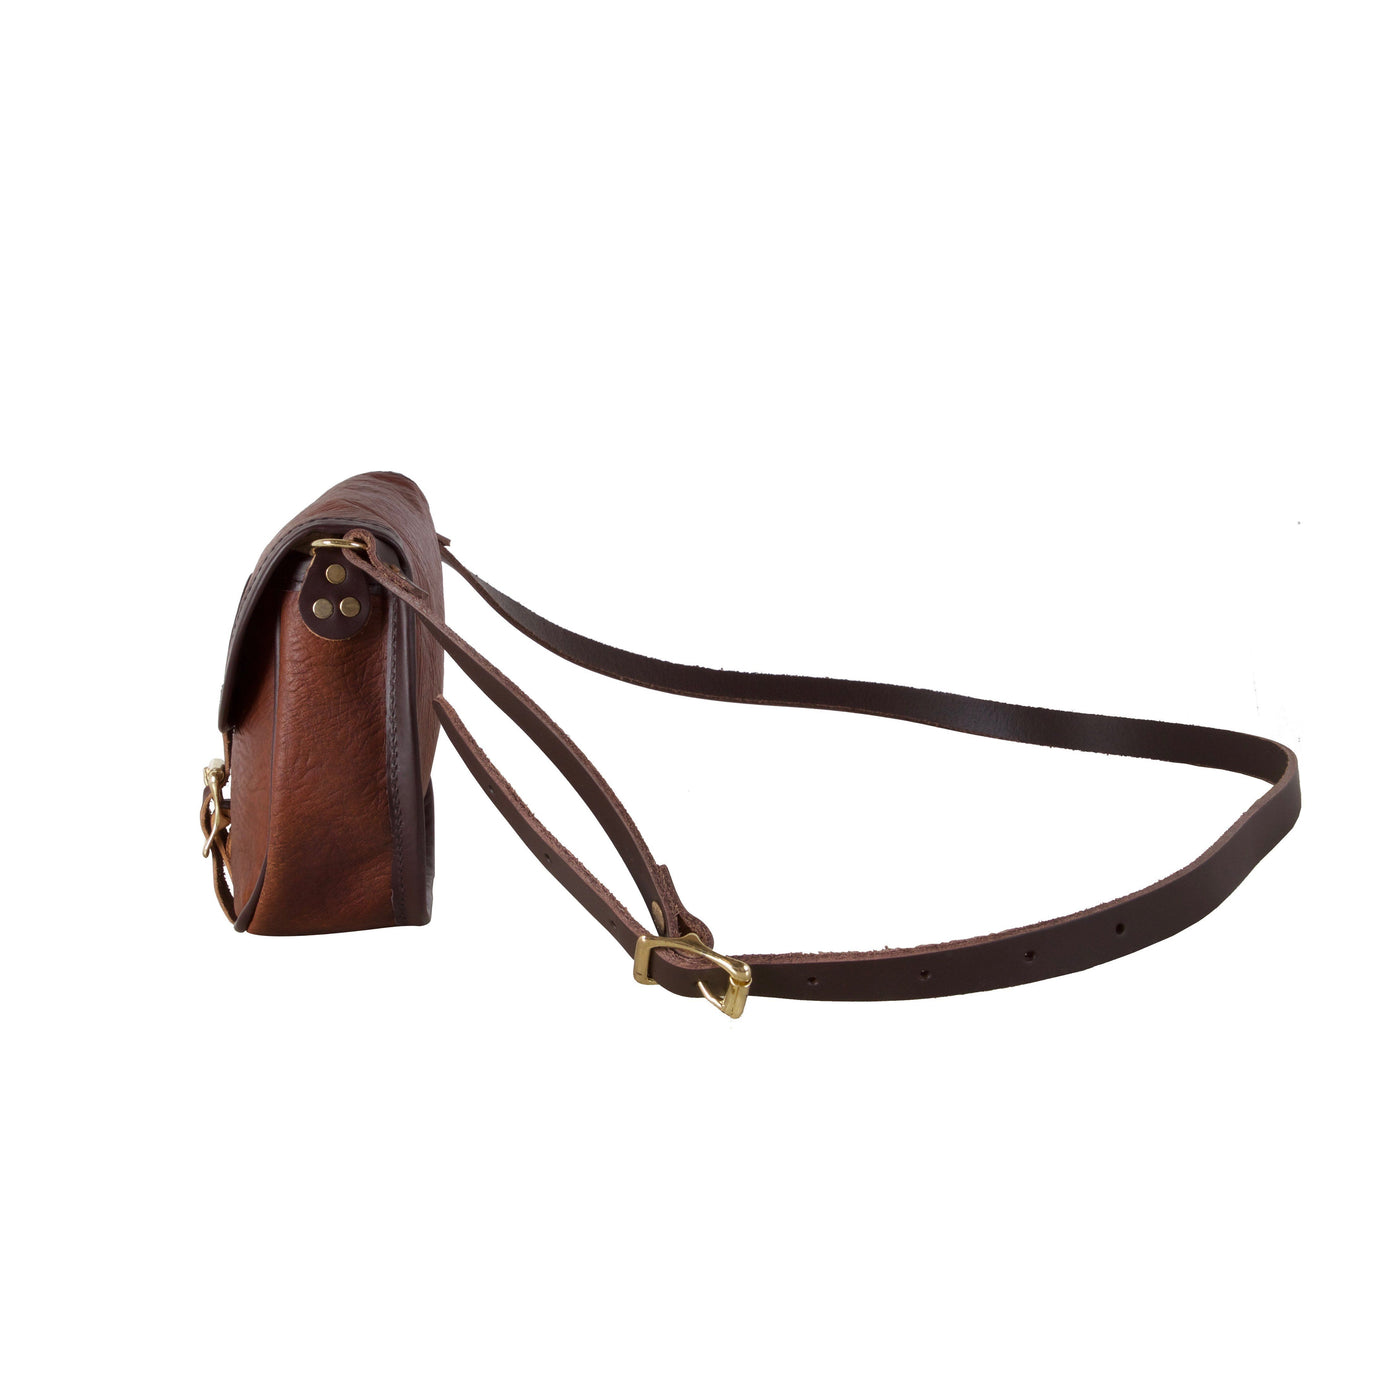 Bison Leather Shell Purse Bag Duluth Pack 